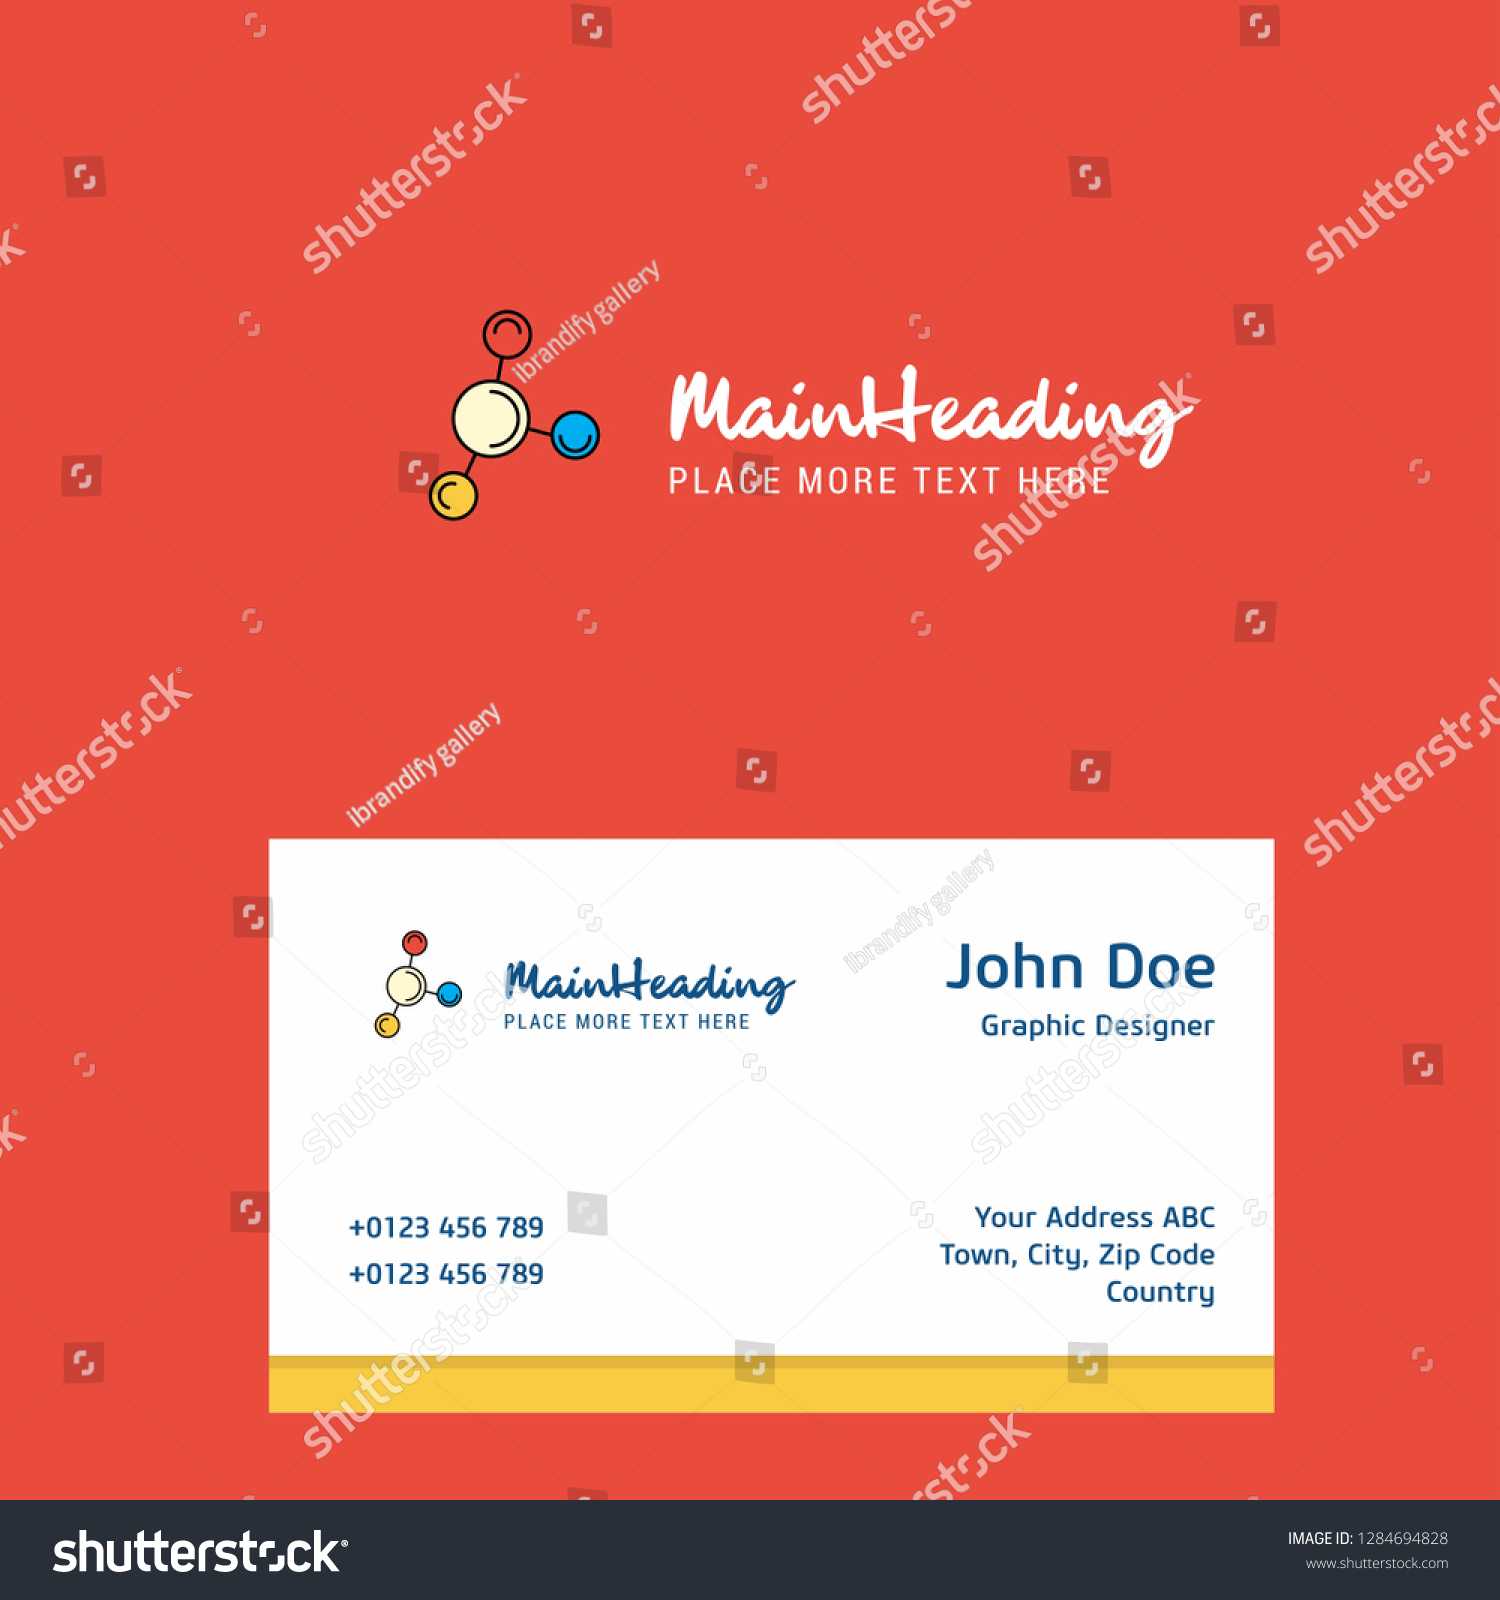 Networking Logo Design Business Card Template Stock Image Inside Networking Card Template